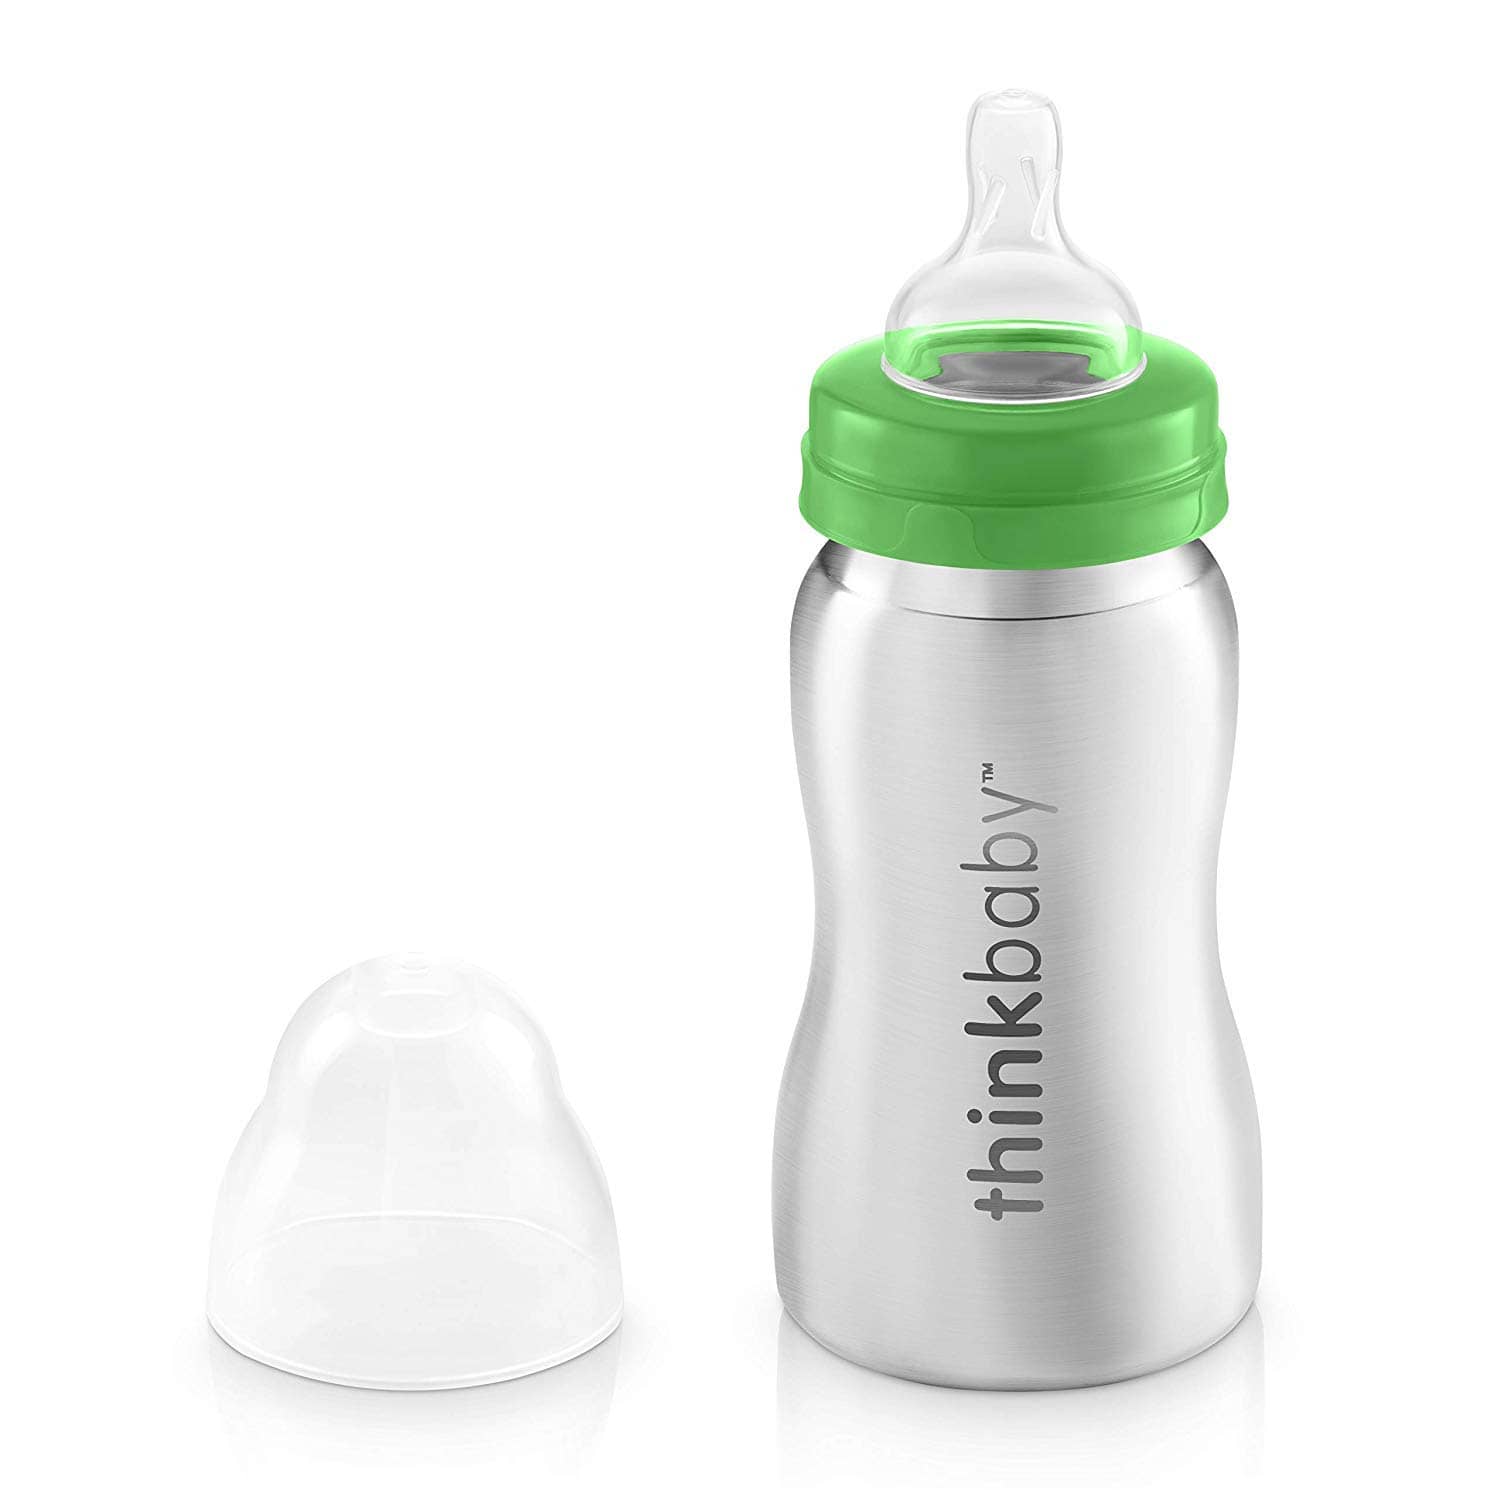 ThinkBaby stainless steel baby bottle with green lid